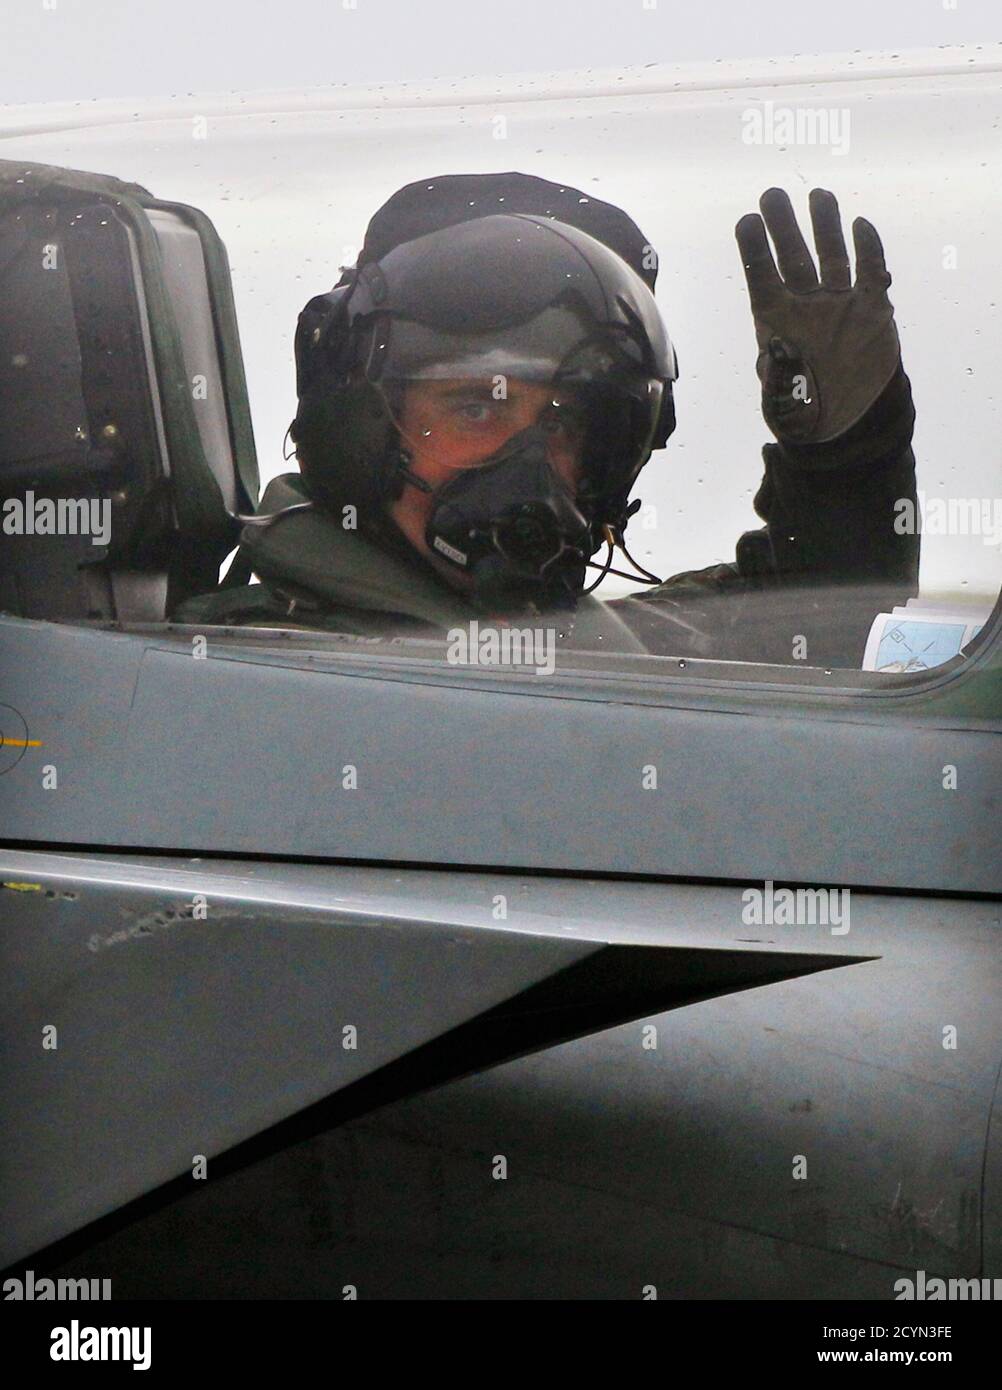 The co-pilot of a Royal Air Force Tornado jet waves to journalists before take off from RAF Lossiemouth base in Moray, northern Scotland October 19, 2010. Britain will unveil on Tuesday its first comprehensive review of the armed forces since 1998, a step the government says will prepare the military for the future but which critics say will usher in only spending cuts.  REUTERS/David Moir (BRITAIN - Tags: POLITICS MILITARY CIVIL UNREST) Stock Photo